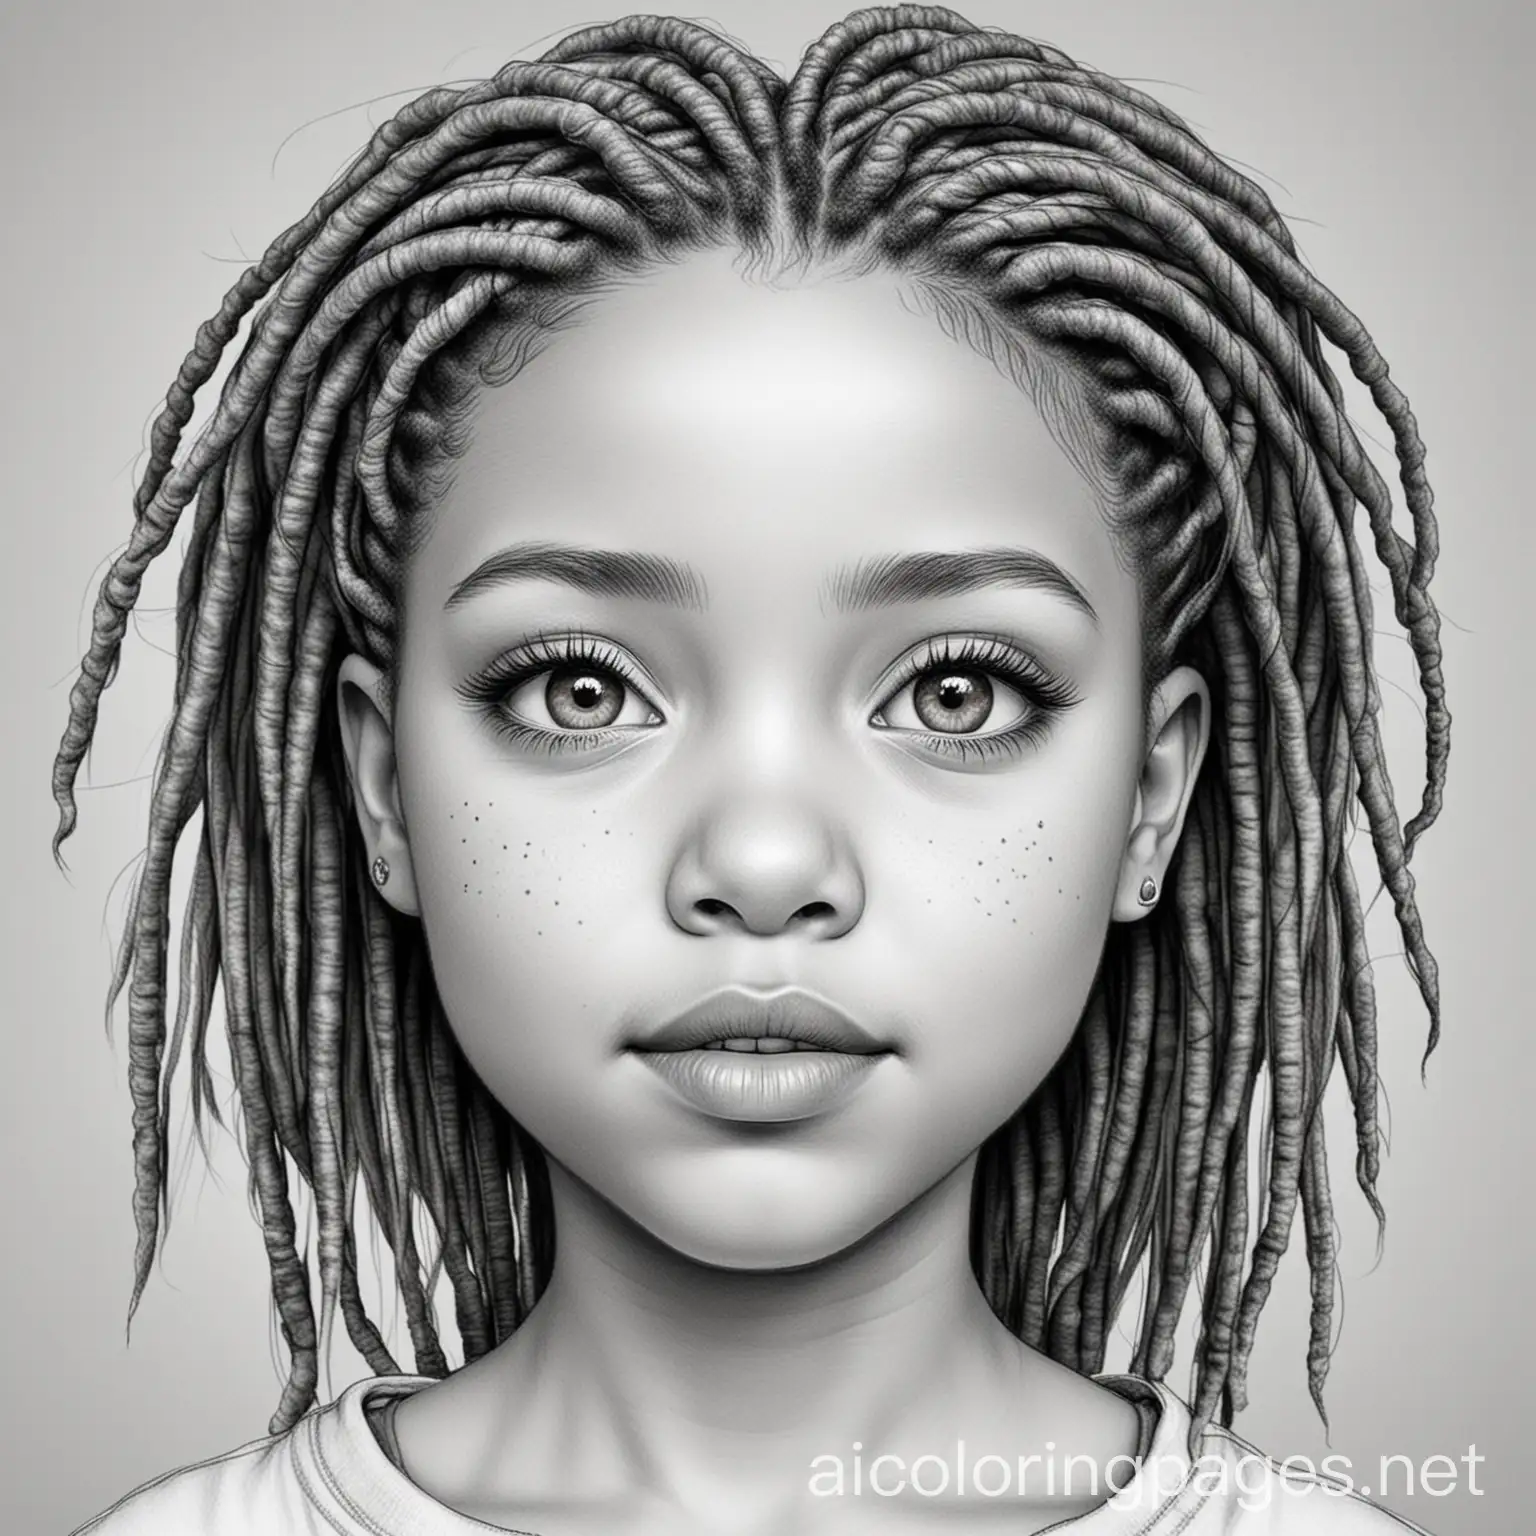 A black female with thin dreadlocks, semi thick eyebrows, face is a little fat, brown eyes, a baby face, she could past for being in her 20's staying in a dystopian futures where advanced technology coexists with societal decay, often focusing on themes of corporate power, urbanization, and human augmentation, black and white only, coloring page, no gray shading, Coloring Page, black and white, line art, white background, Simplicity, Ample White Space. The background of the coloring page is plain white to make it easy for young children to color within the lines. The outlines of all the subjects are easy to distinguish, making it simple for kids to color without too much difficulty